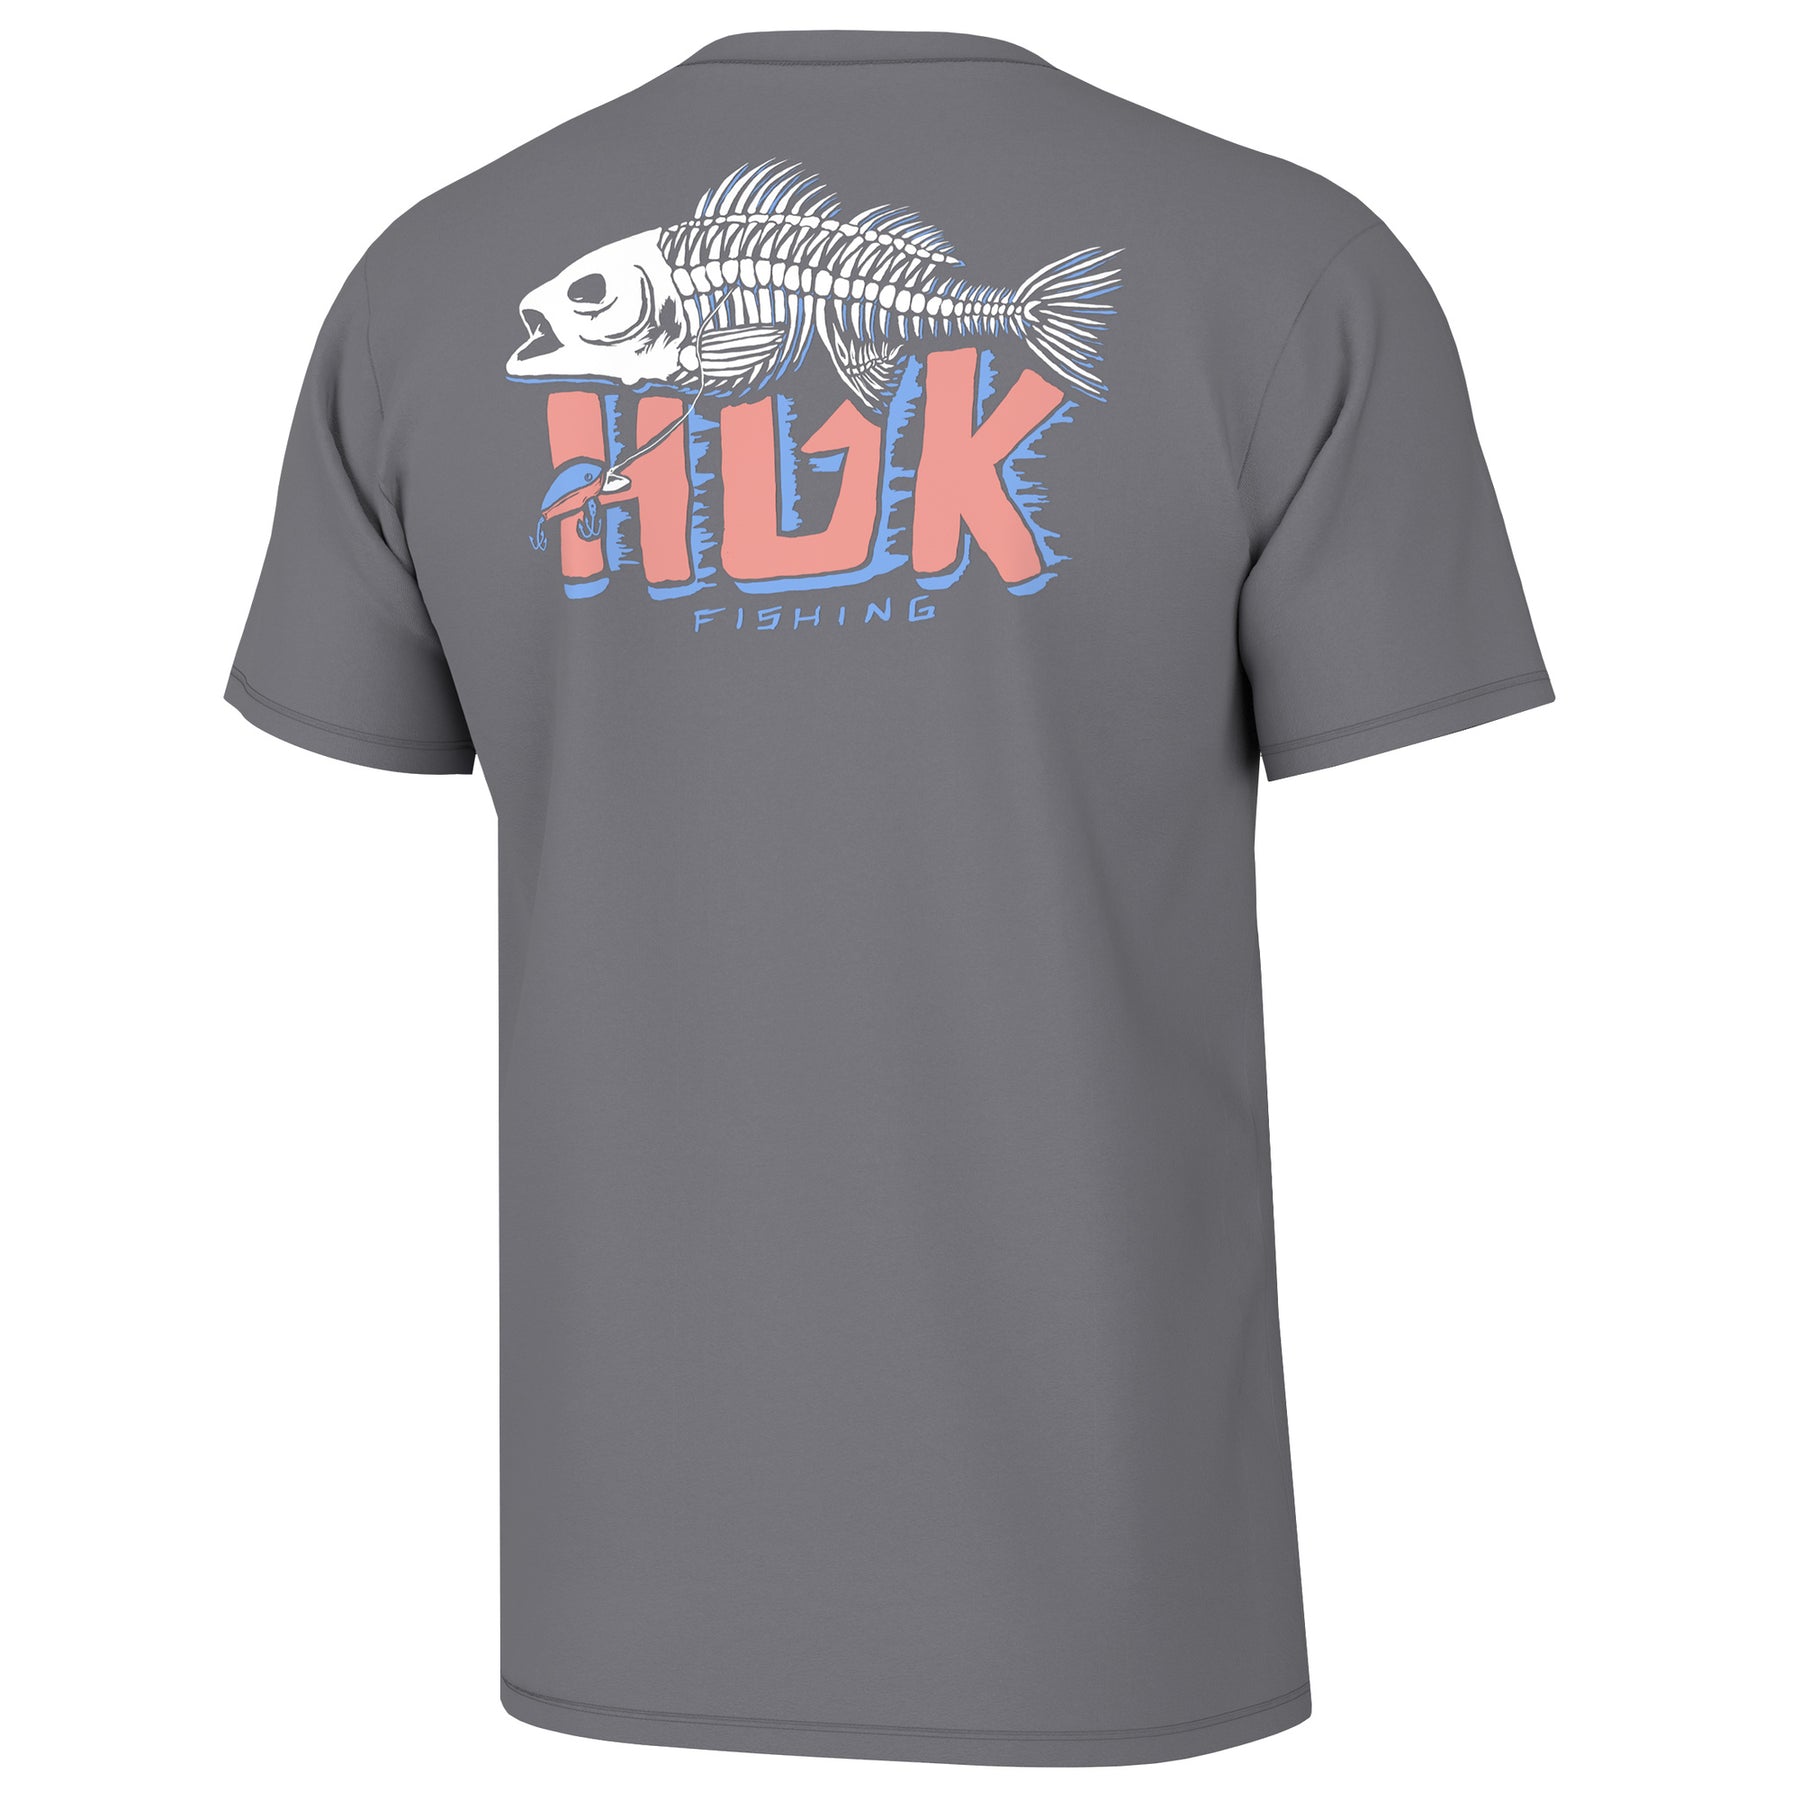 Huk Unisex Kids Fishing Clothing, Shoes & Accessories for sale